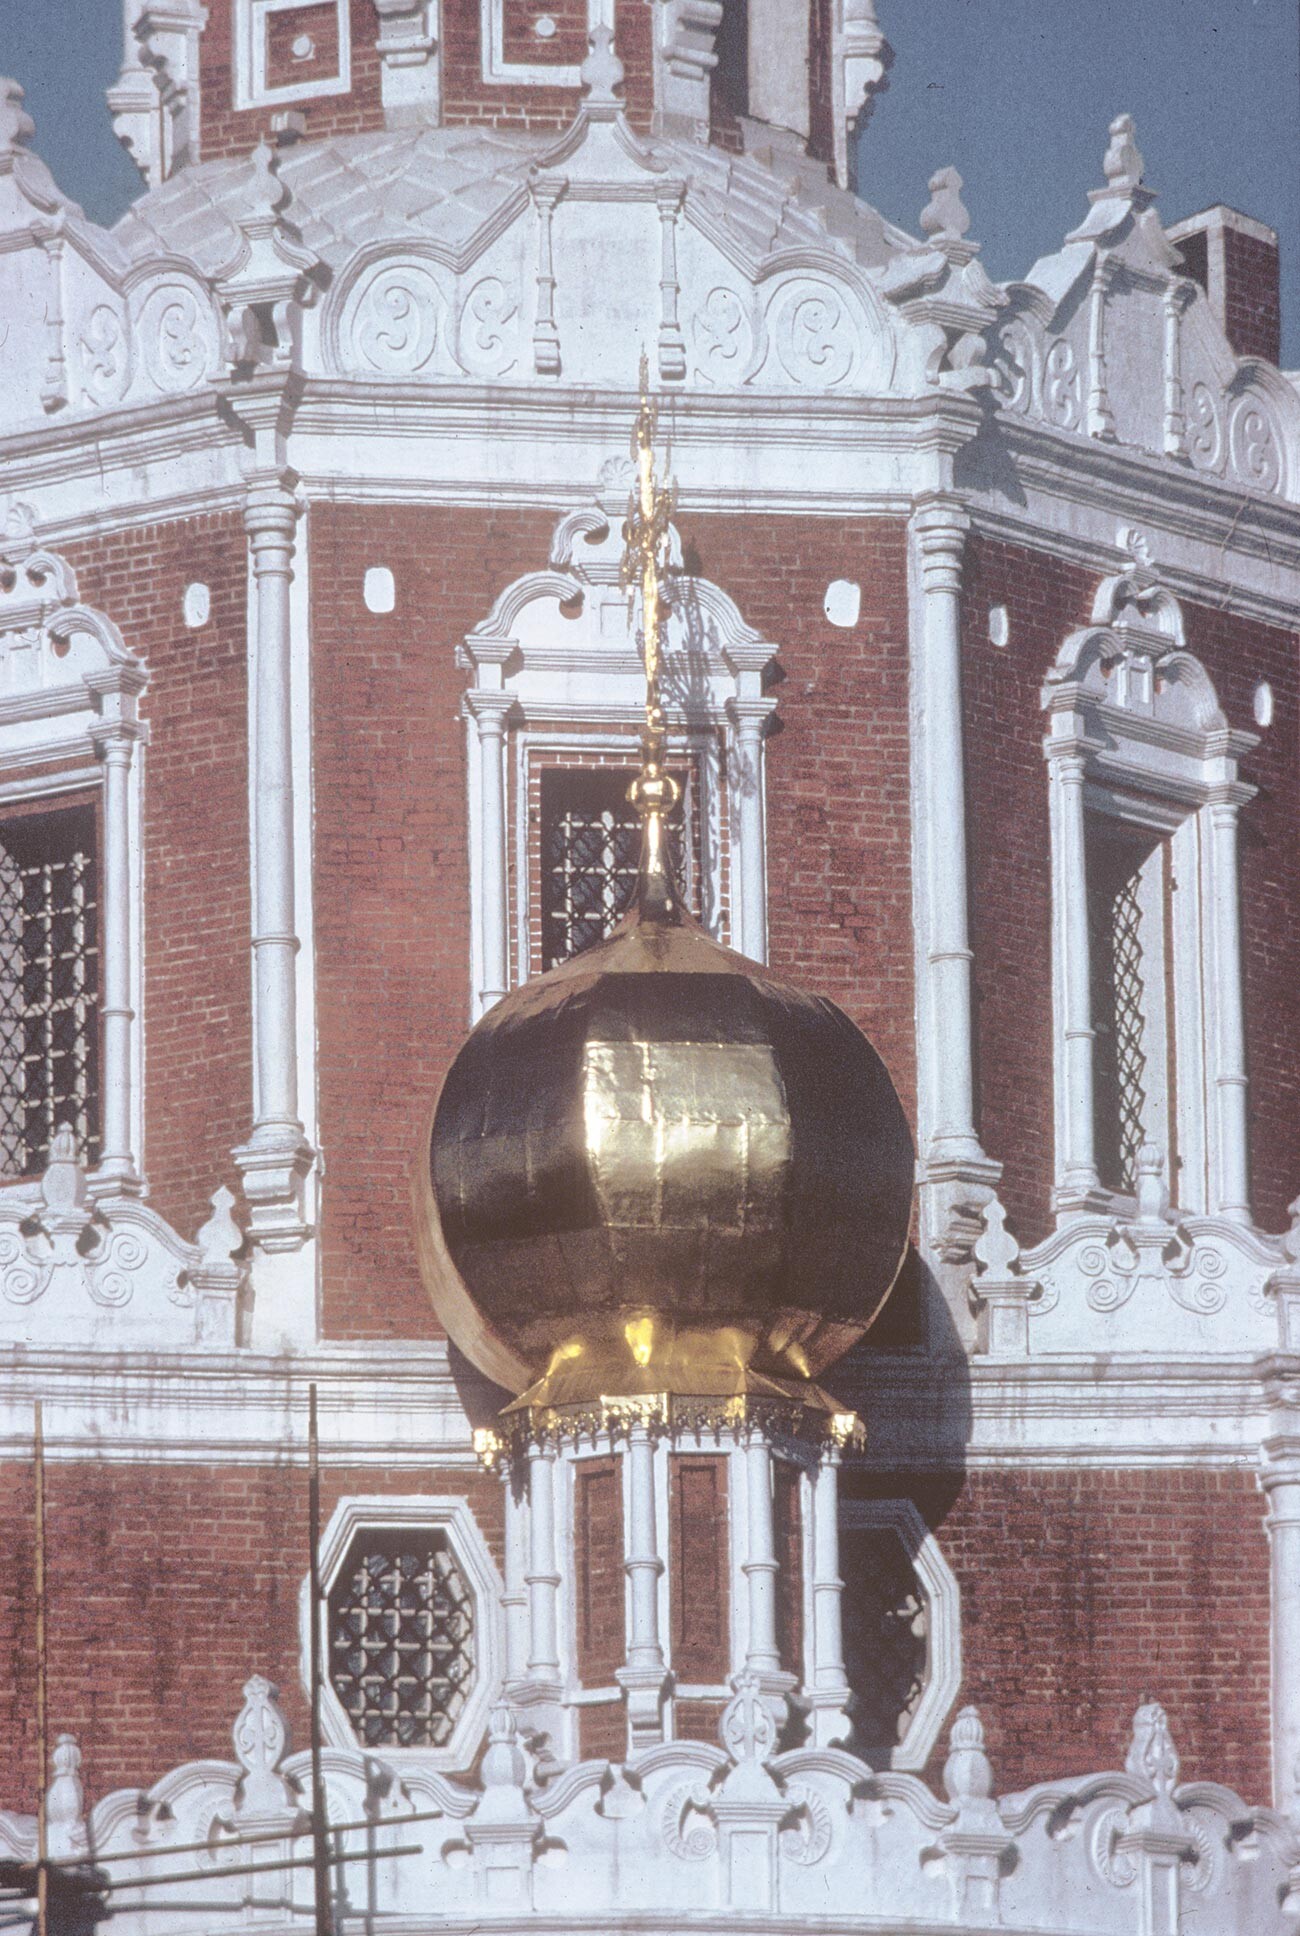 Church of the Intercession at Fili. South facade, cupola over projecting lobe. February 19, 1980